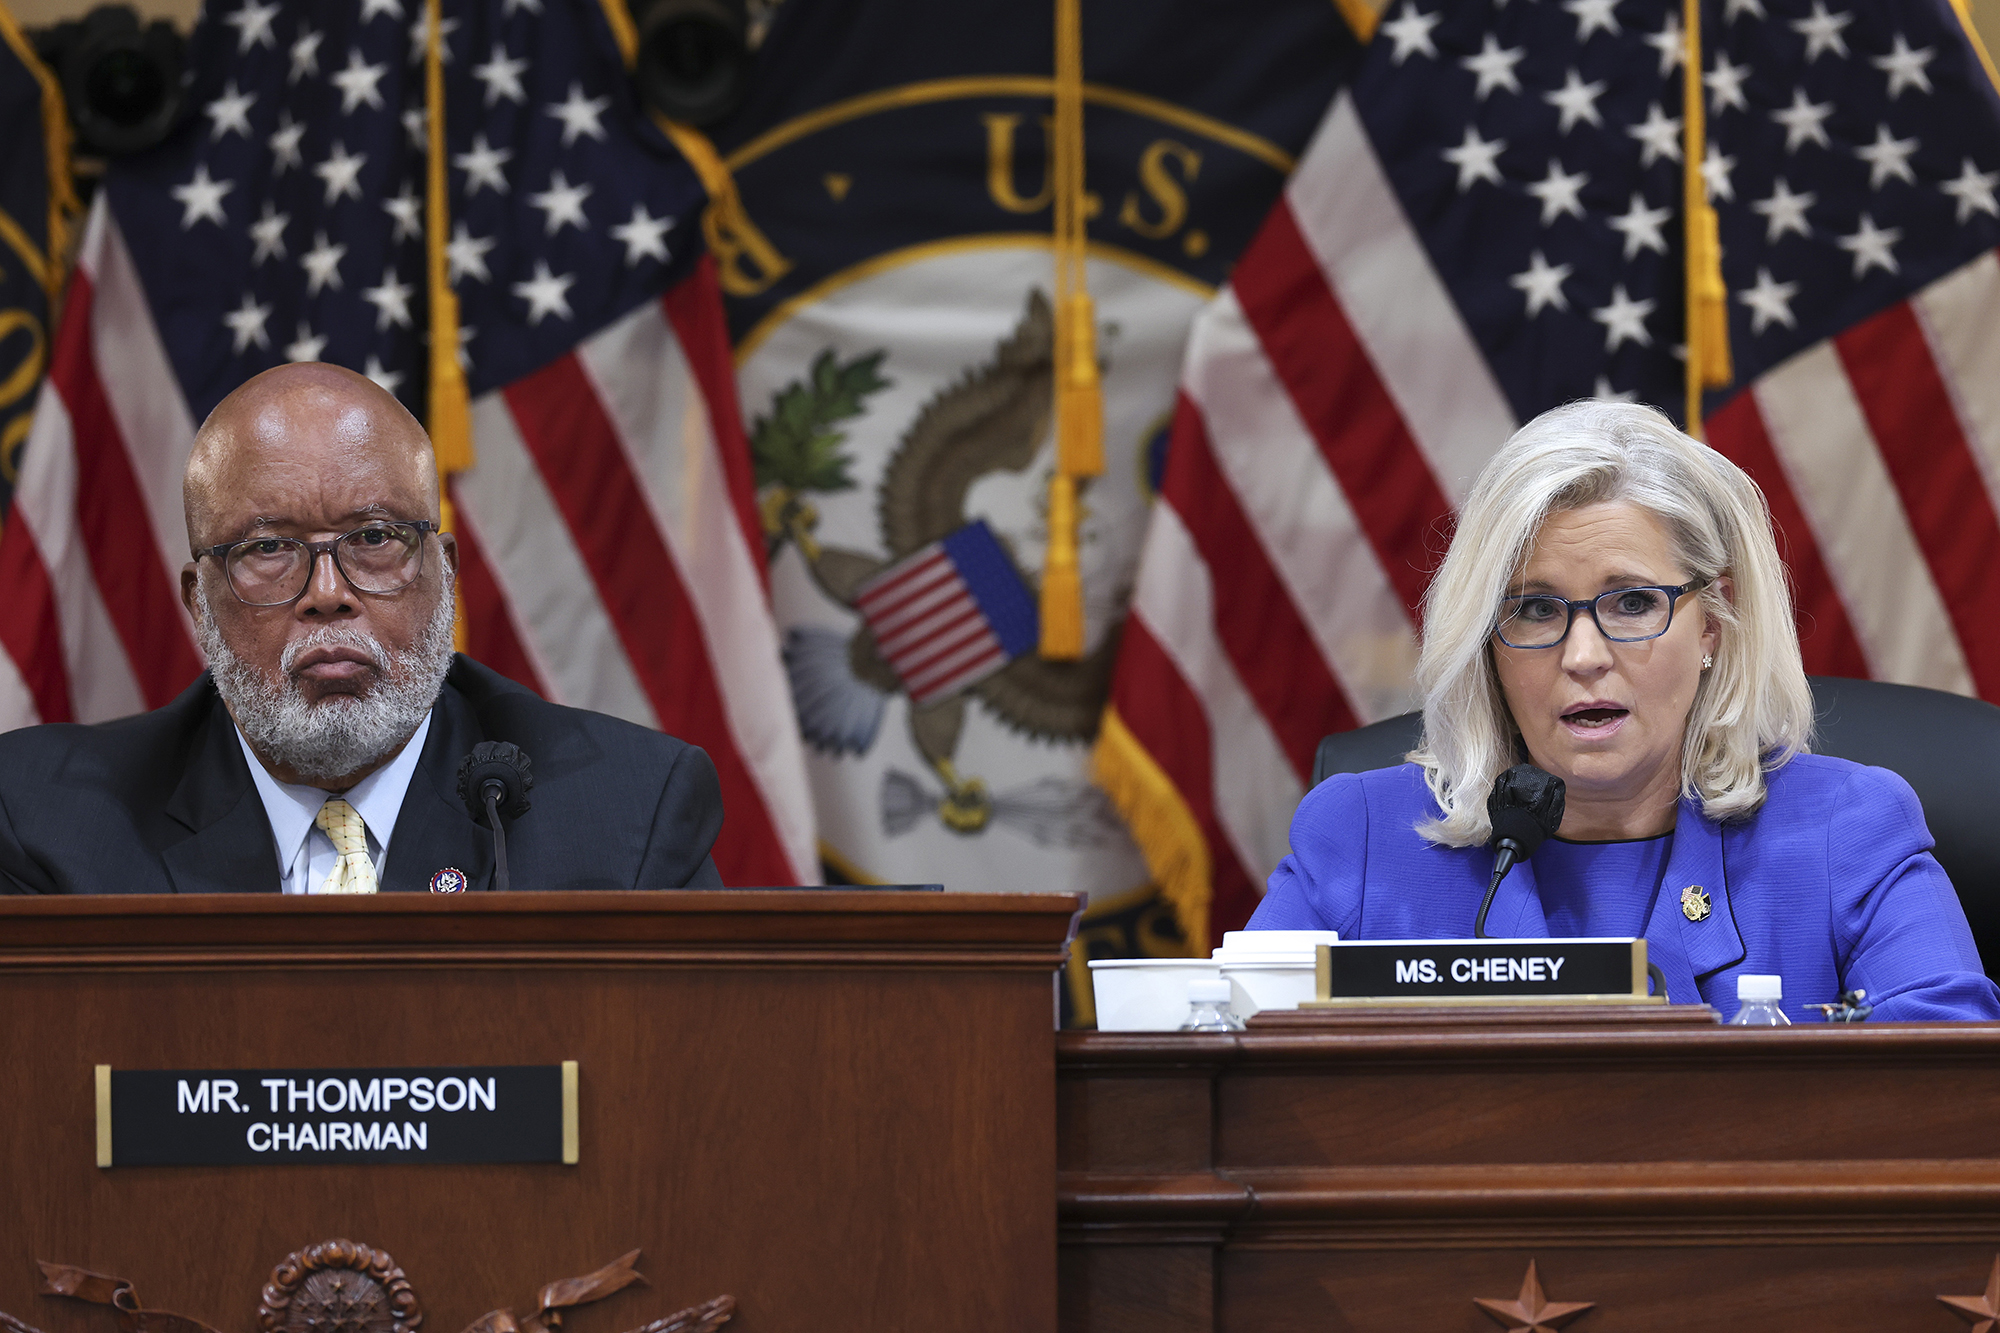 PHOTO: Rep. Bennie Thompson, Chair of the Select Committee to Investigate the January 6th Attack on the U.S. Capitol, and Vice Chairwoman Rep. Liz Cheney preside over a hearing on Capitol Hill, June 9, 2022.